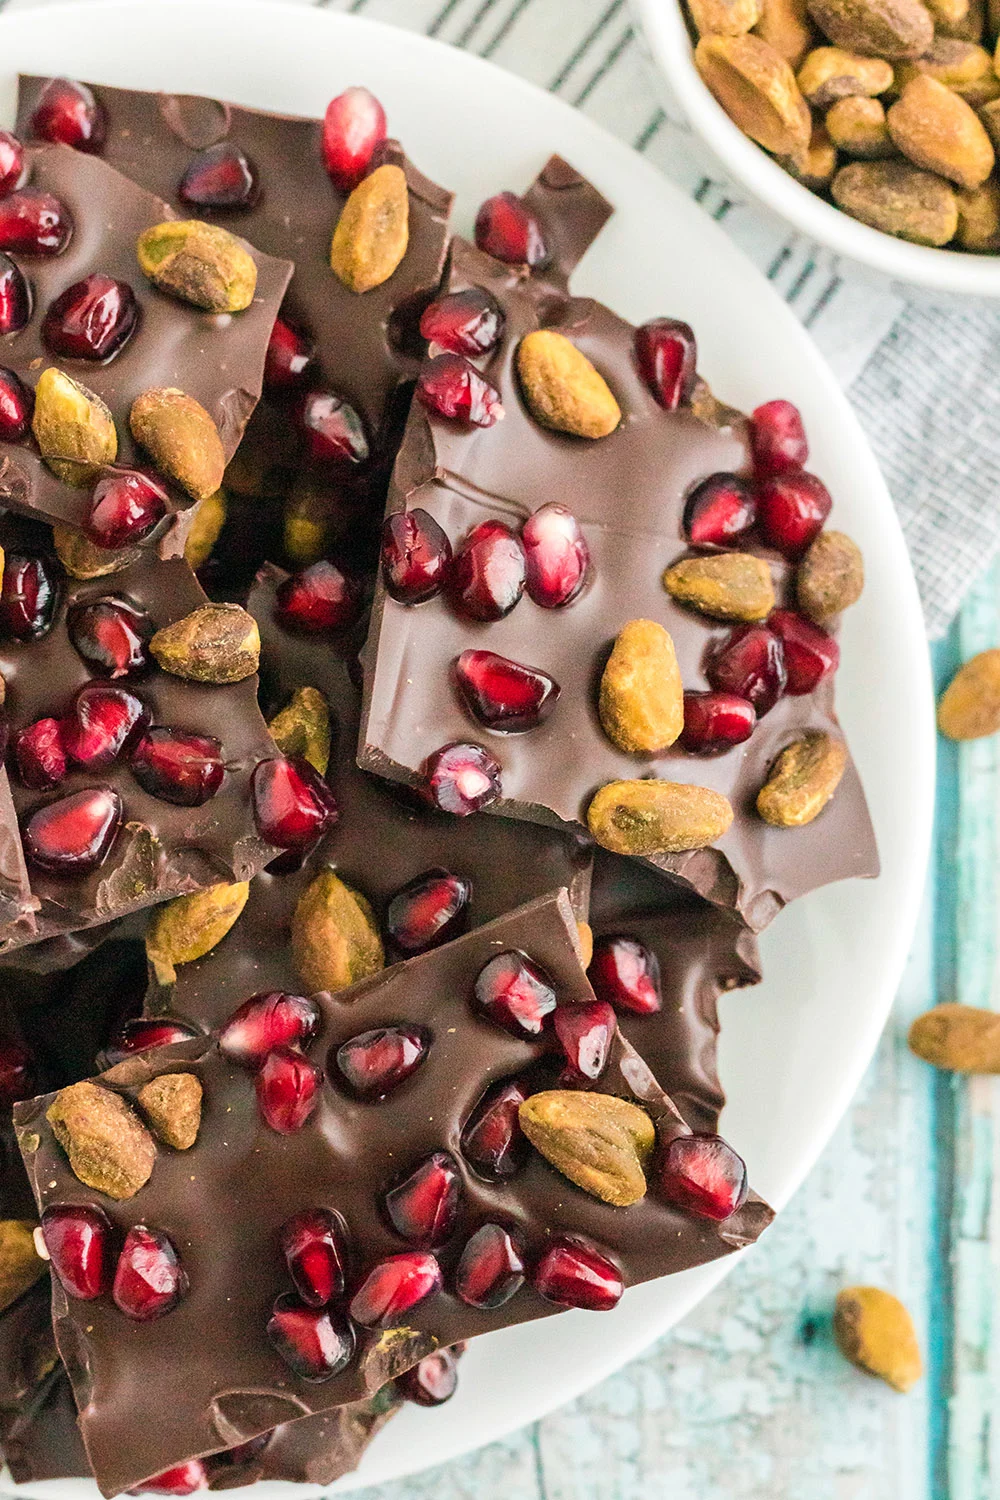 Dark chocolate candy with pistachios and pomegranate arils in it. 